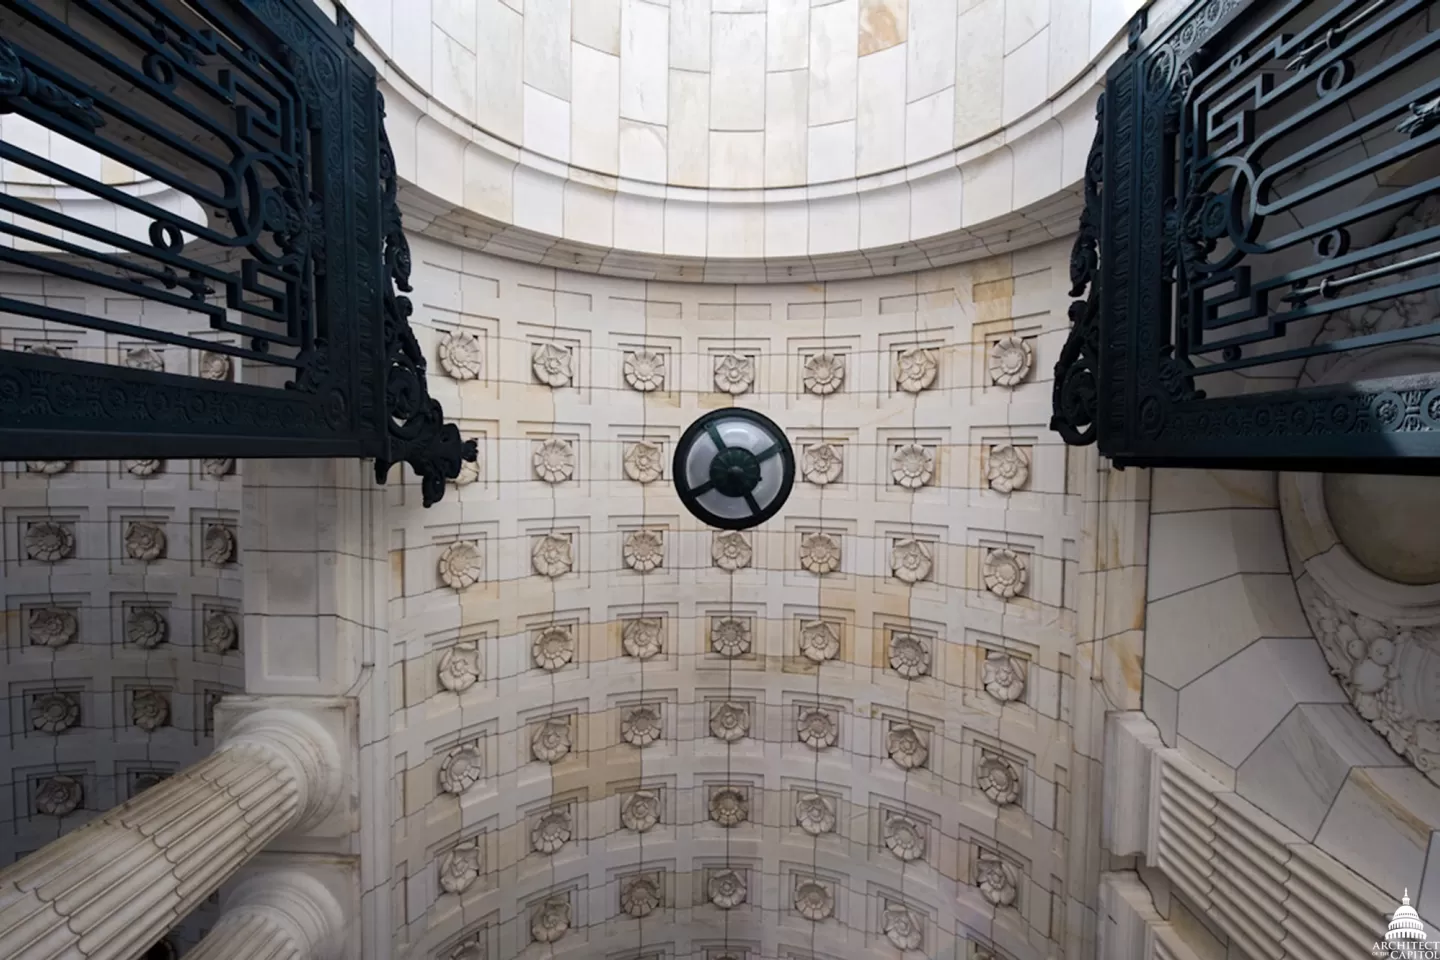 Looking up at the carriage entrance and gates at the Russell Senate Office Building.